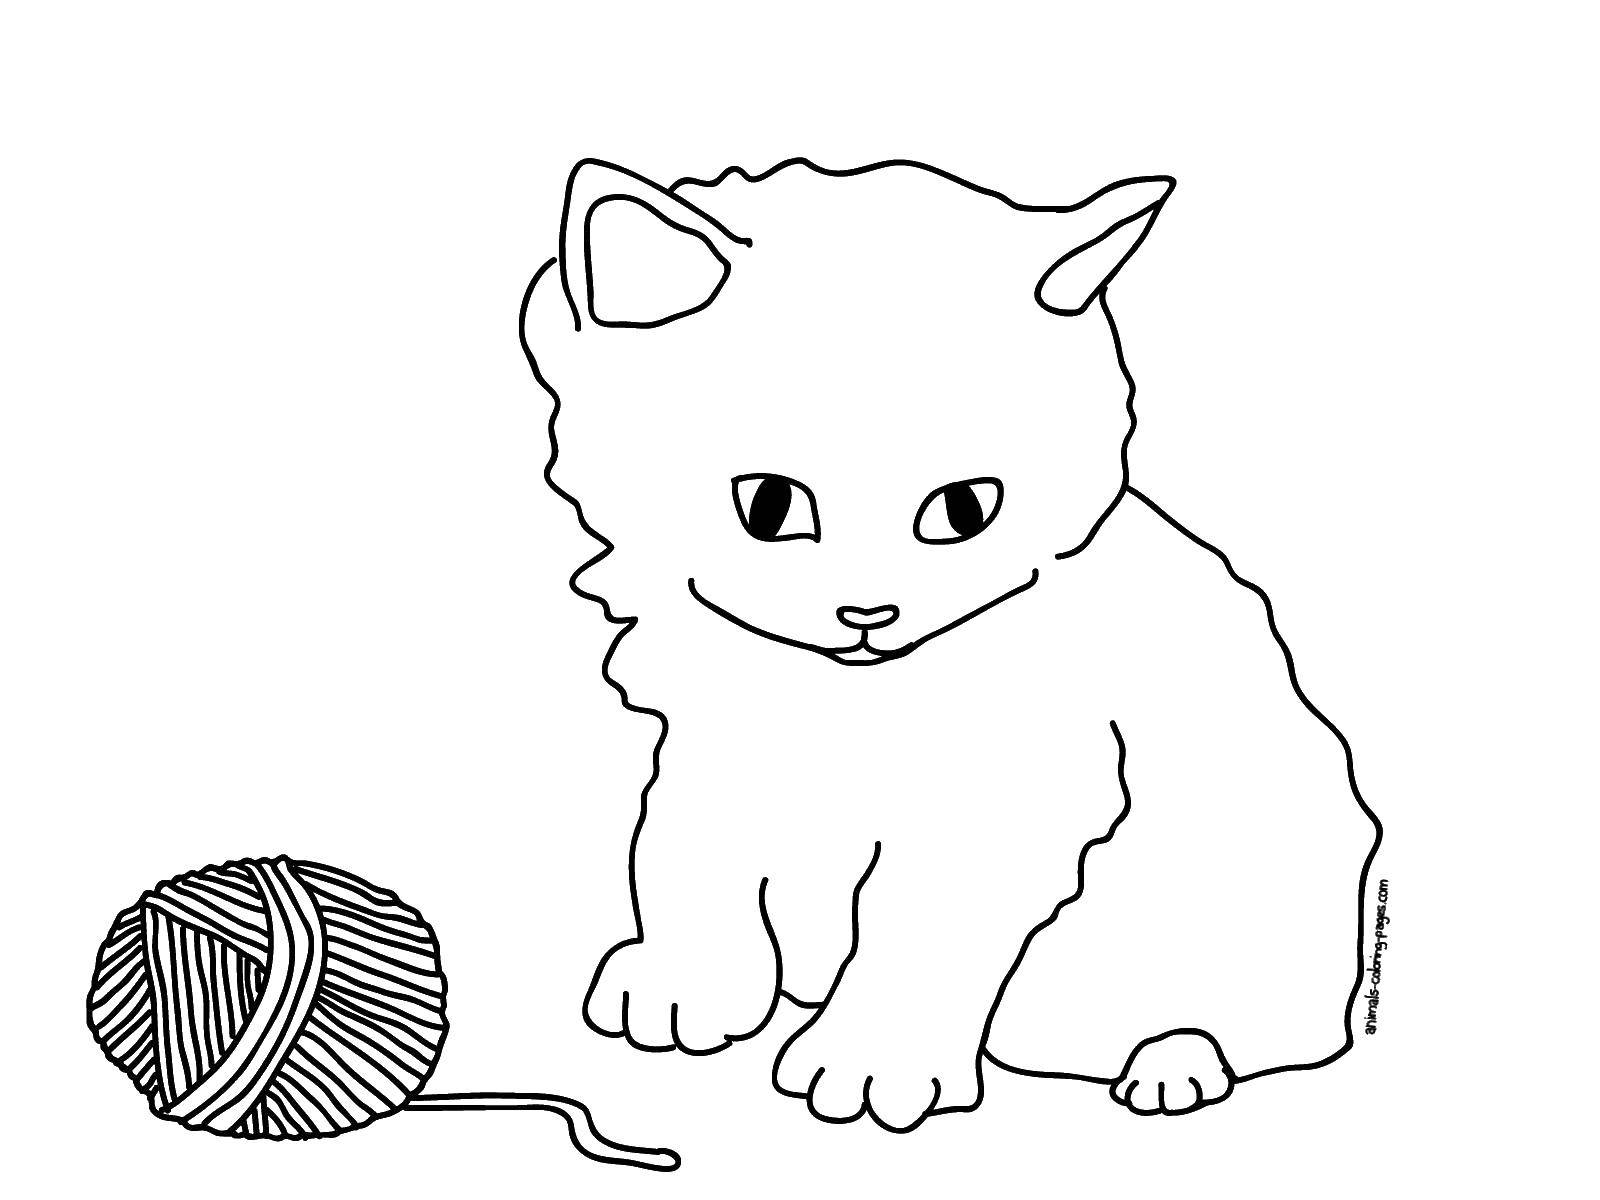 Coloring The kitten plays with a ball. Category Cats and kittens. Tags:  Animals, kitten.